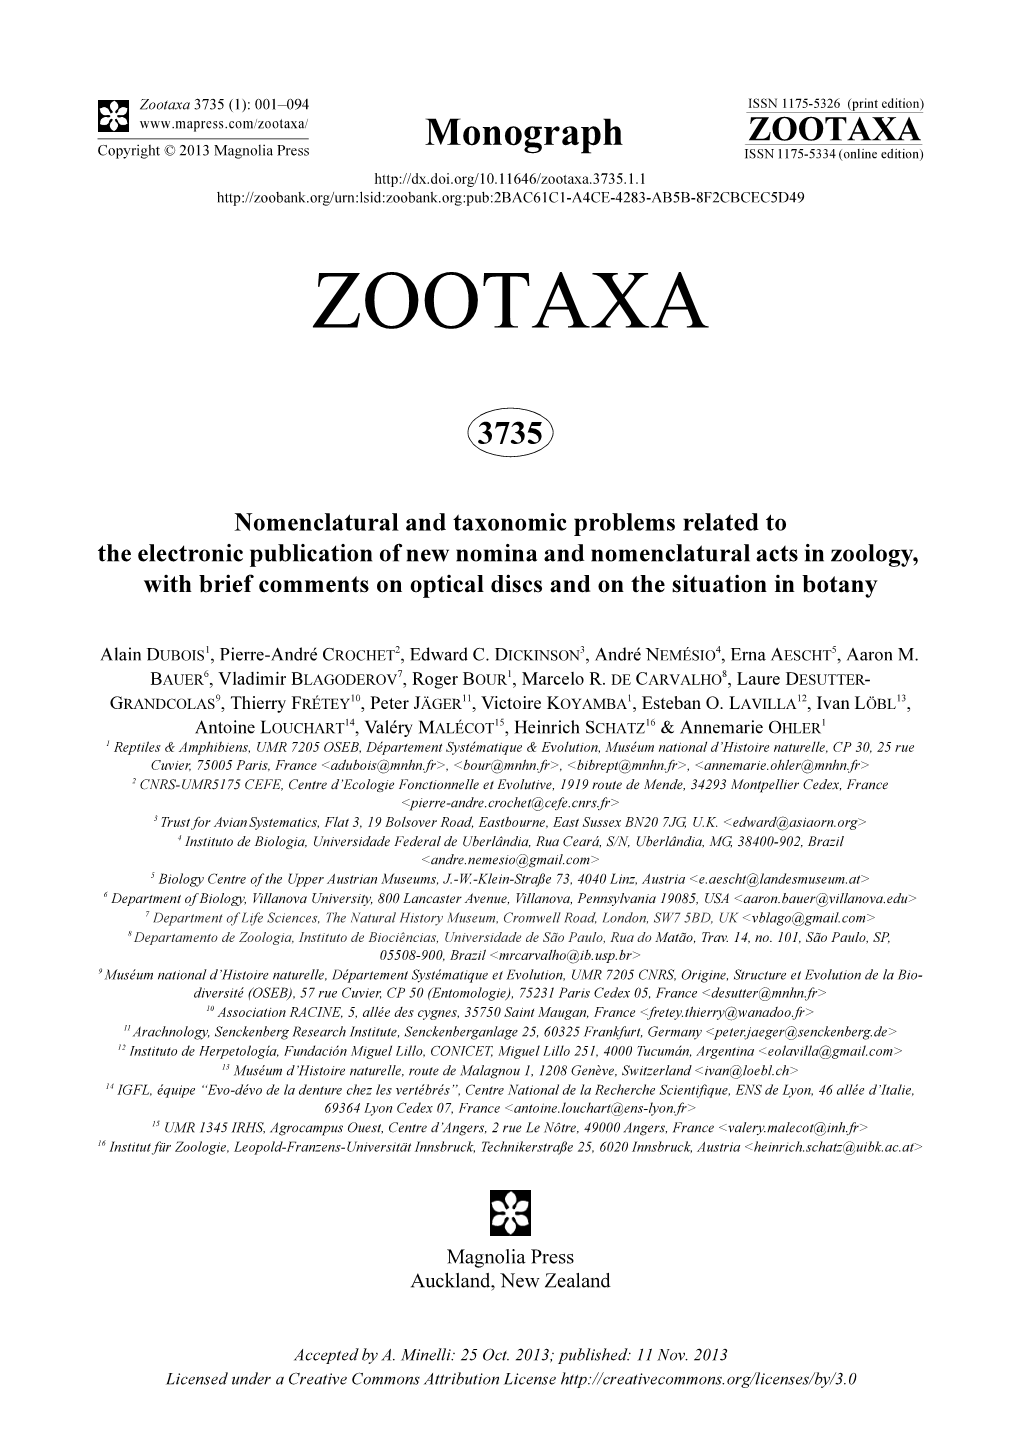 Nomenclatural and Taxonomic Problems Related to the Electronic